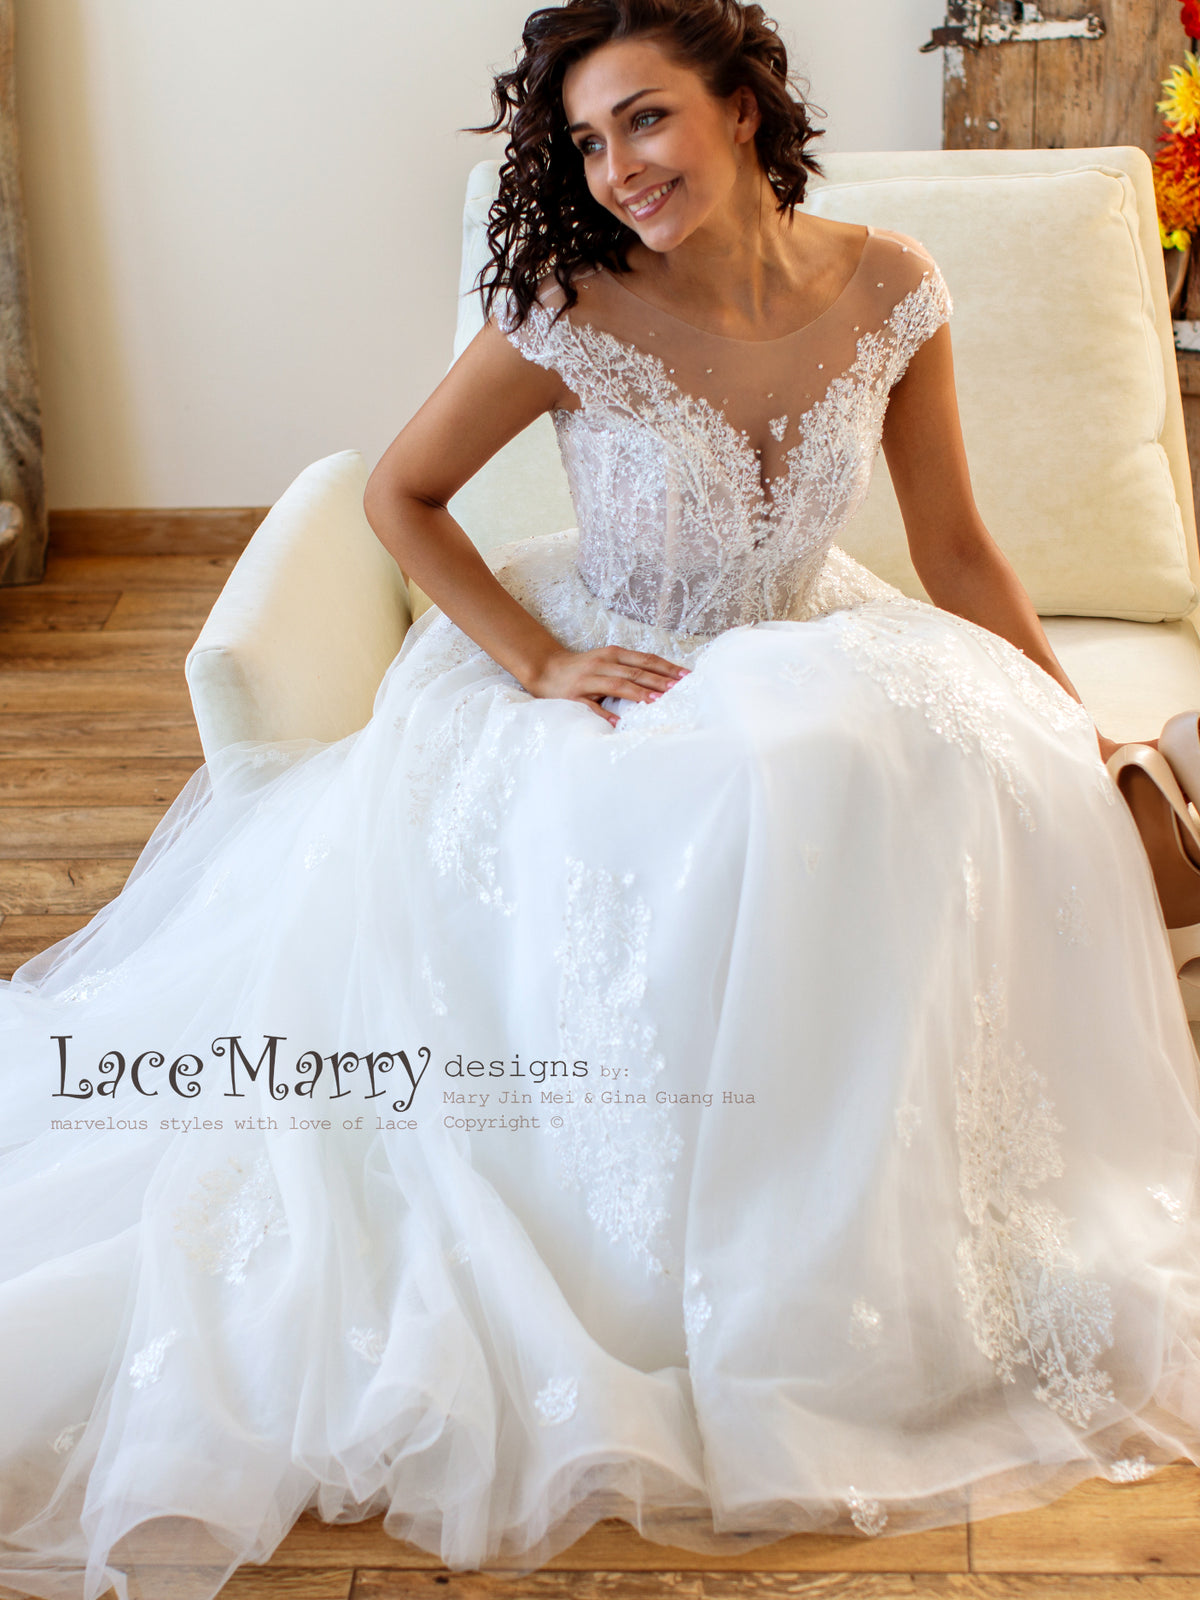 Embroidered Lace Wedding Dress with Illusion Cap Sleeves - LaceMarry